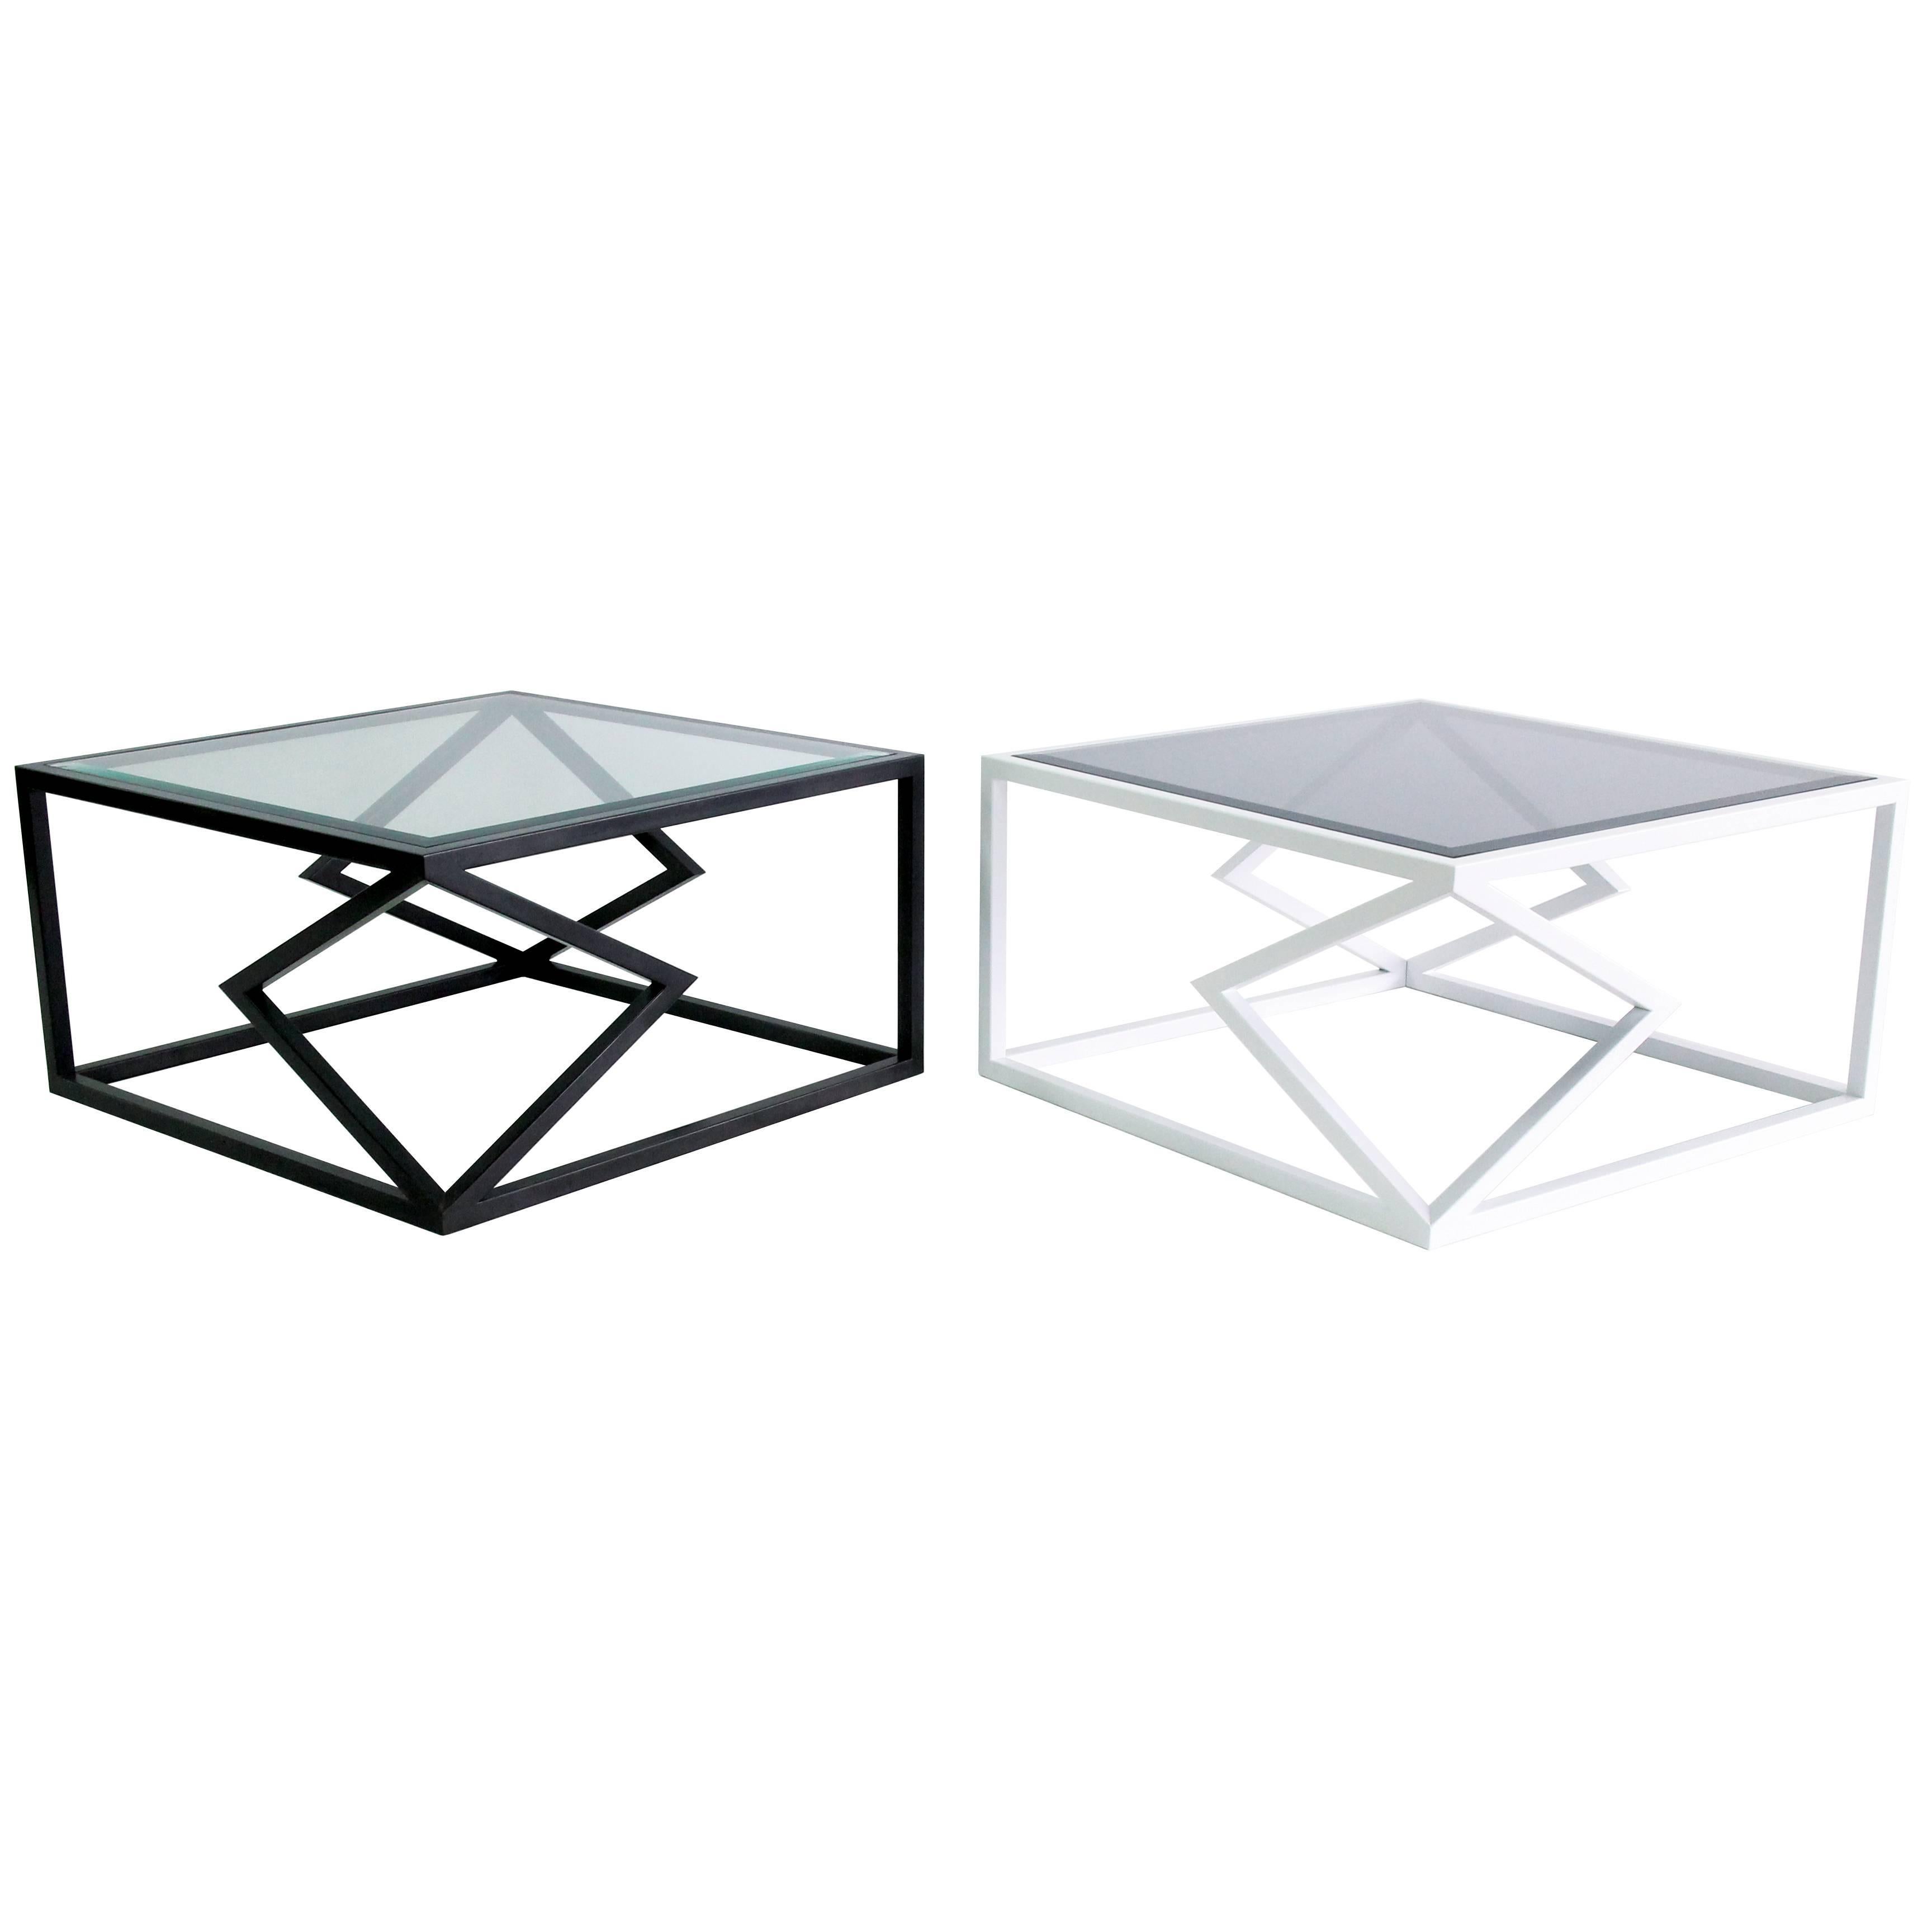 The “Two Diamonds” cocktail table is from the 2016 collection of Alex Drew and no one. Inspired by traditional craftsmanship while incorporating a modern edge, AD&NO's work plays on light, textures, and form.

Each piece is handcrafted by Alex